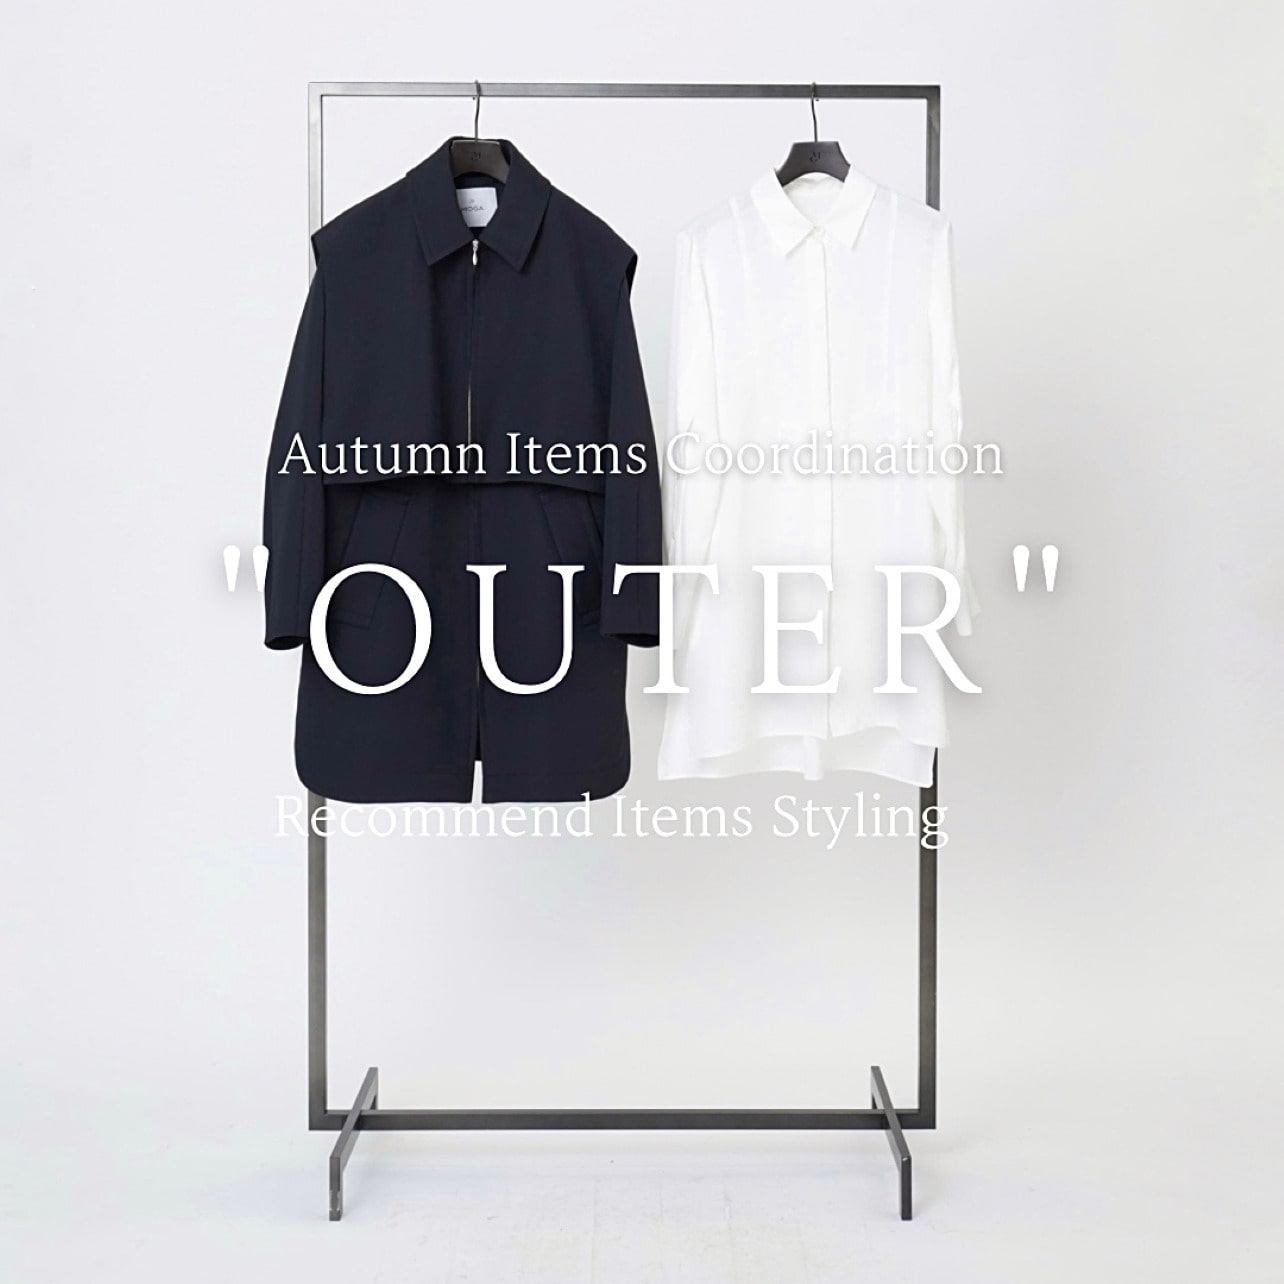 Recommend Items Styling "OUTER"